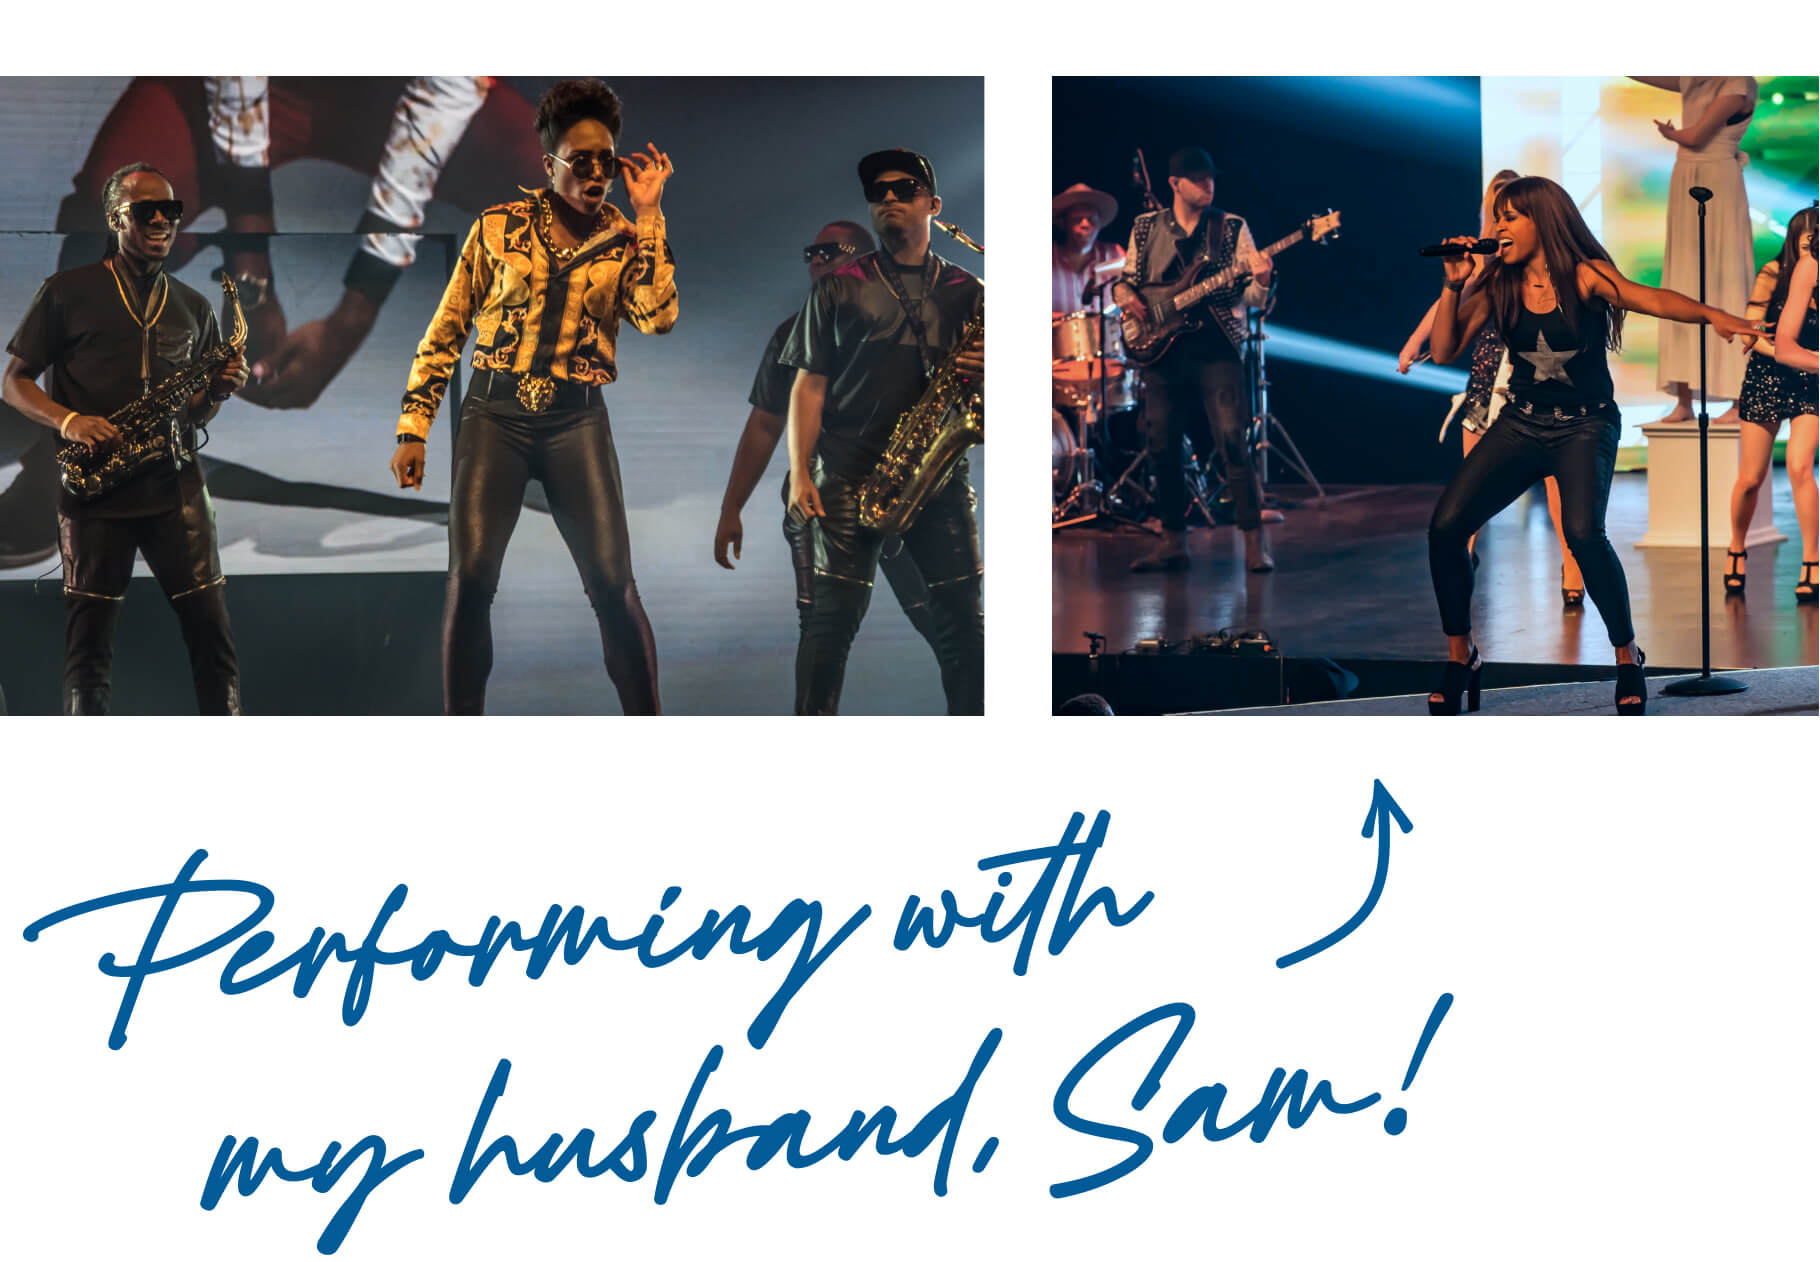 "Performing with my husband, Sam!"